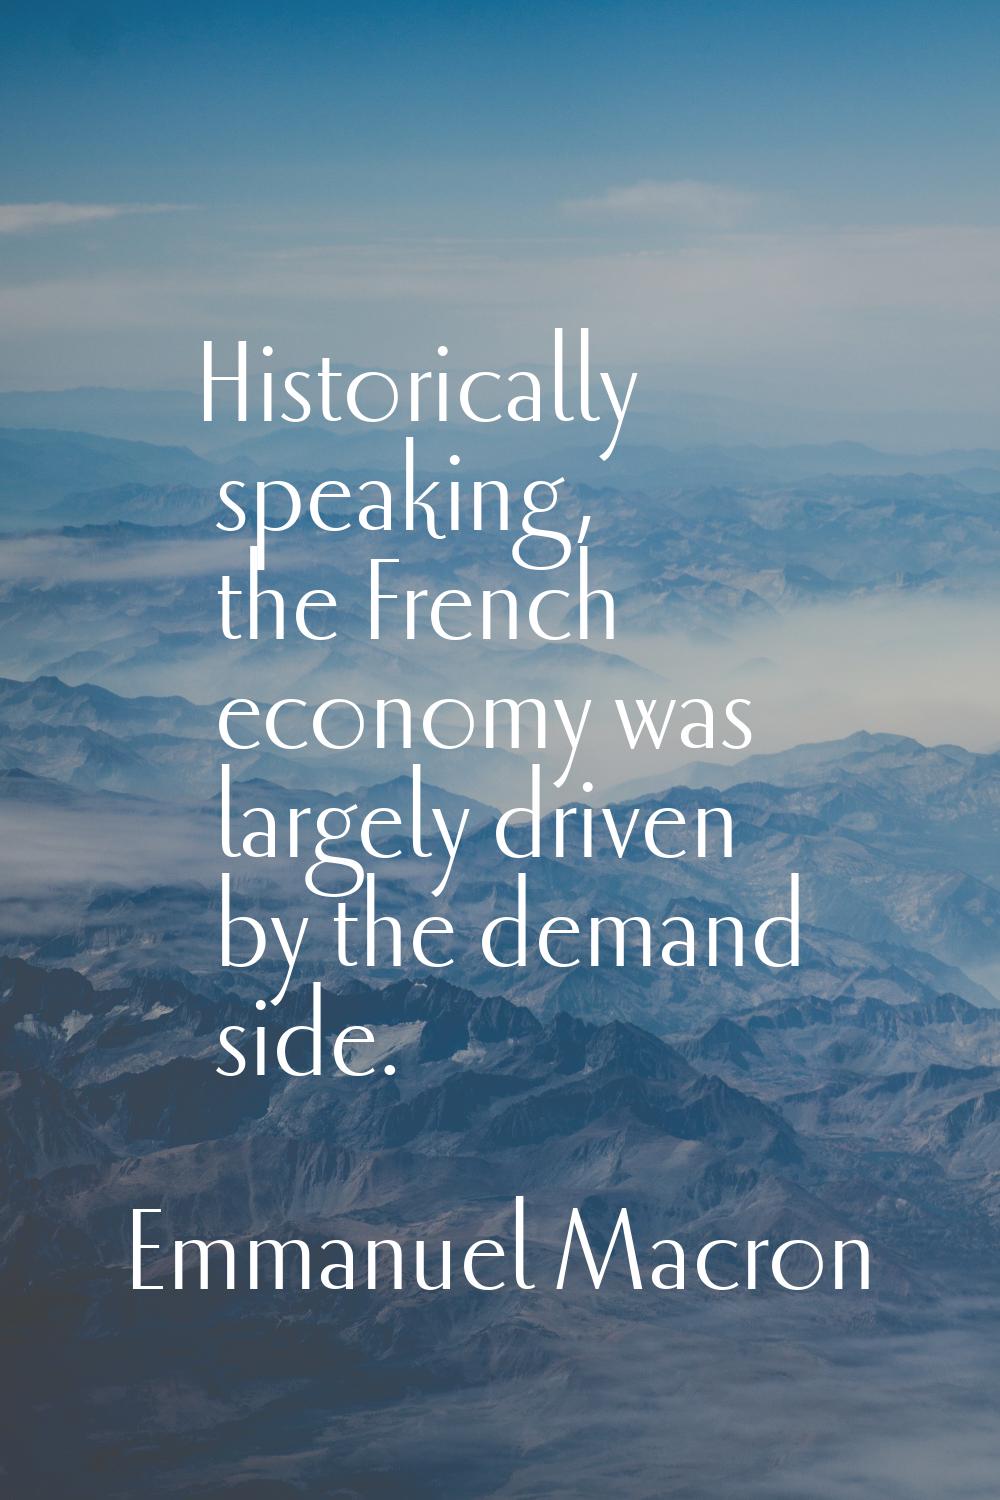 Historically speaking, the French economy was largely driven by the demand side.